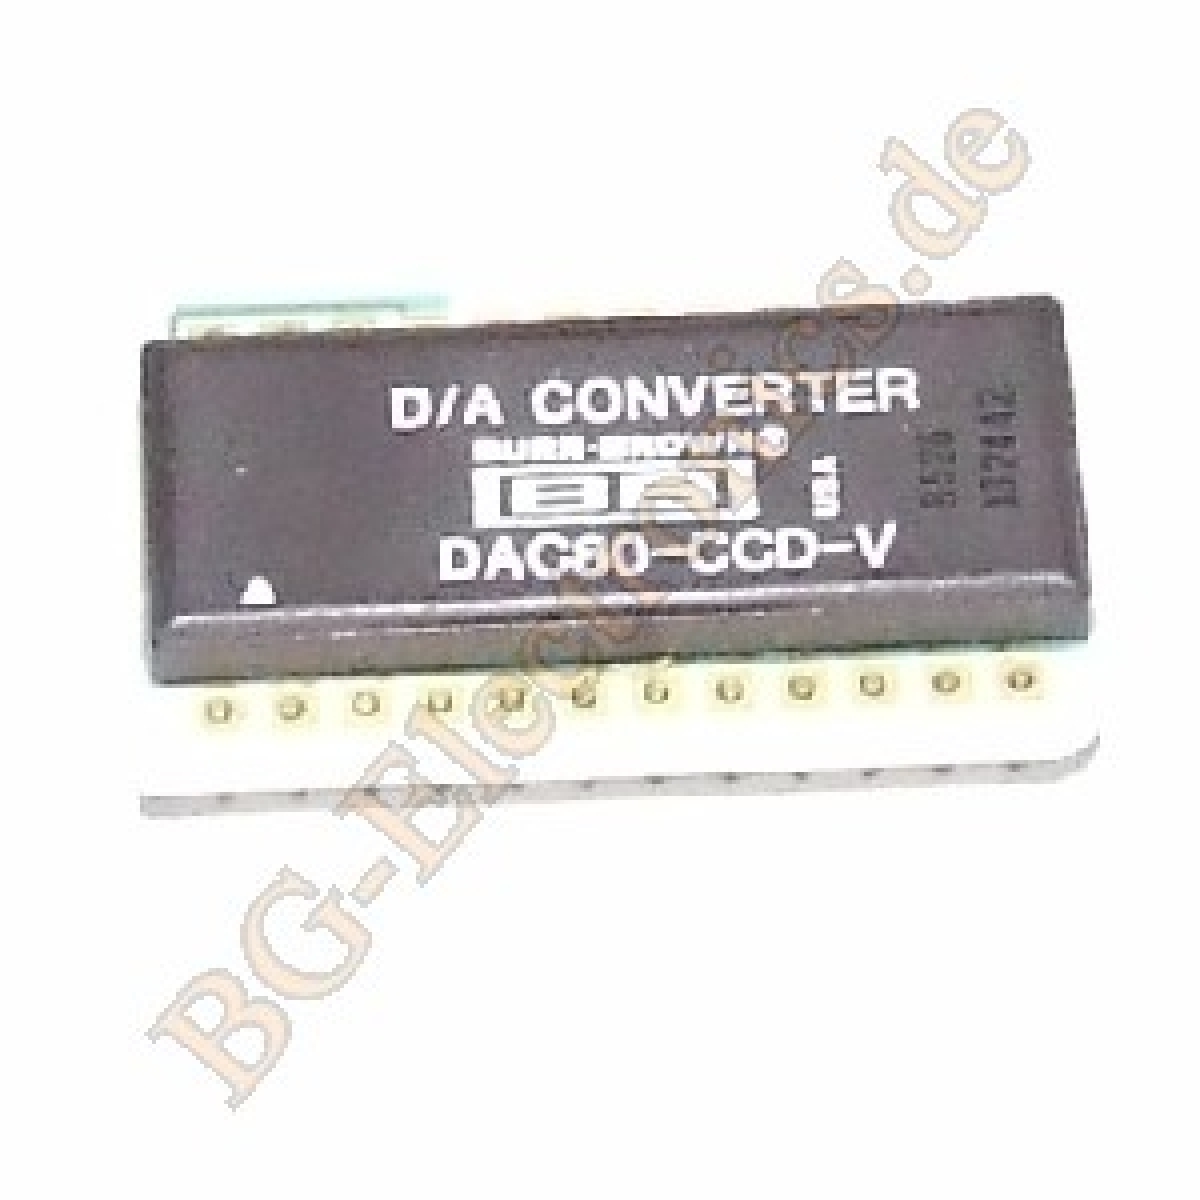 AC80-CCD-V Complete Low Cost 12-Bit D\/A 